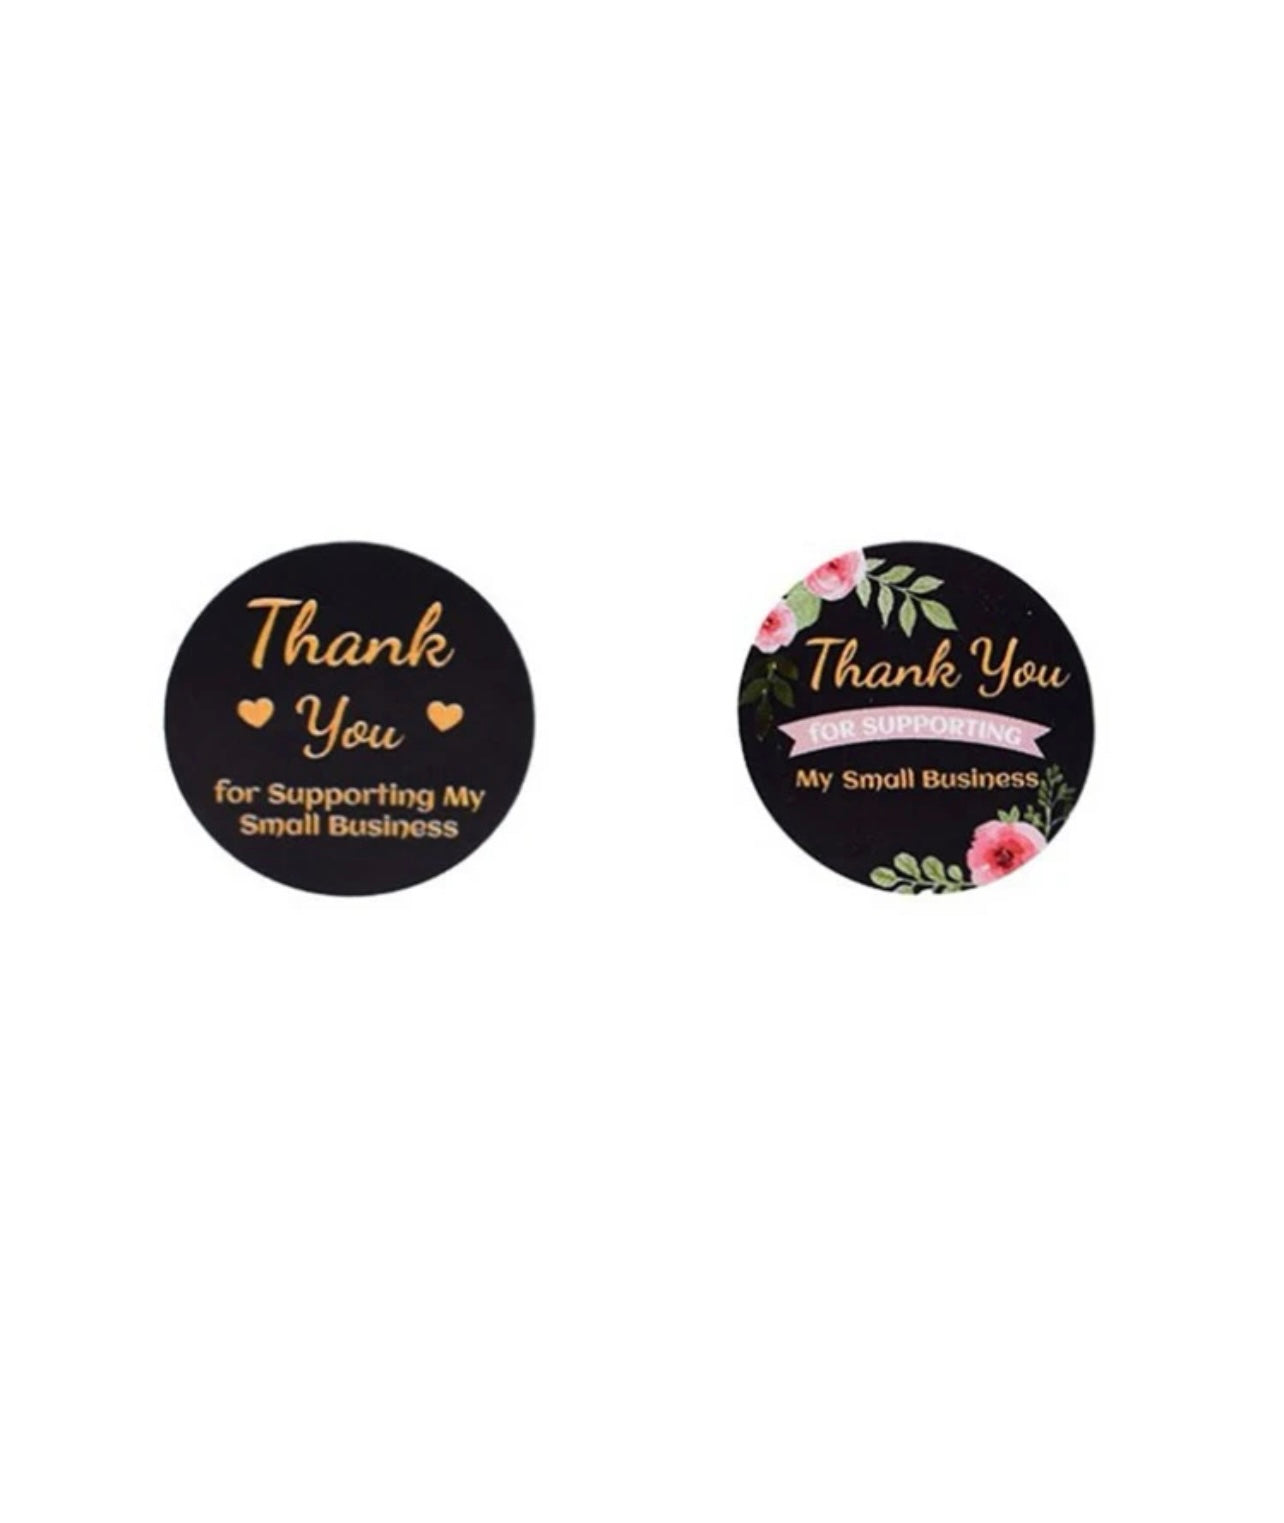 500pcs Thank you for supporting my small business stickers